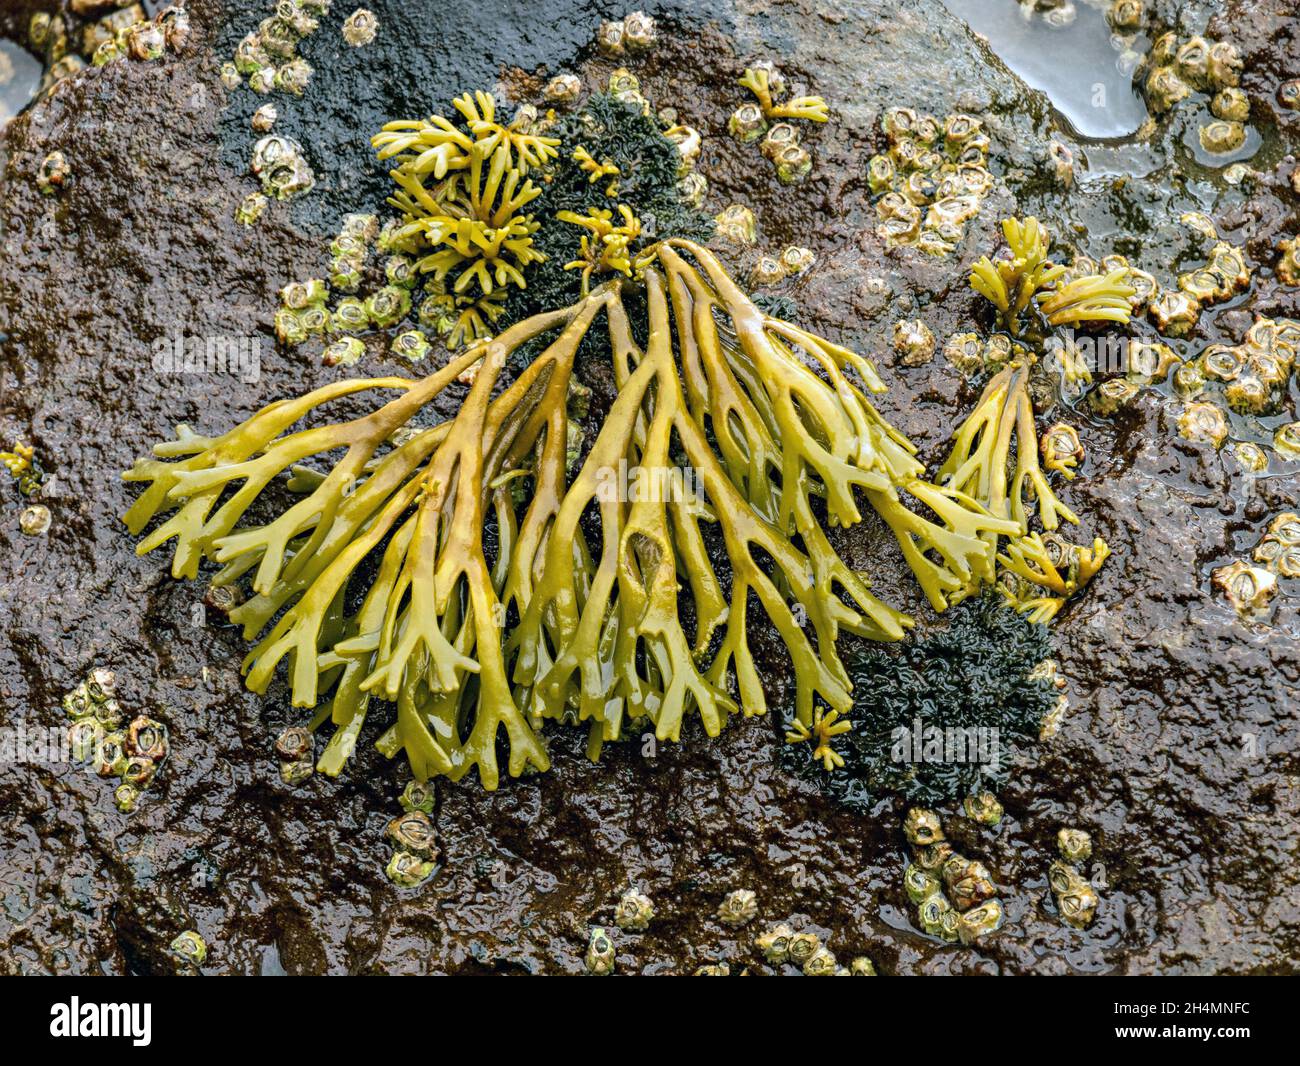 Closeup of bright green and wet Channelled wrack (Pelvetia canaliculata) seaweed growing and barnacles on black seaside rock, Scotland, UK Stock Photo